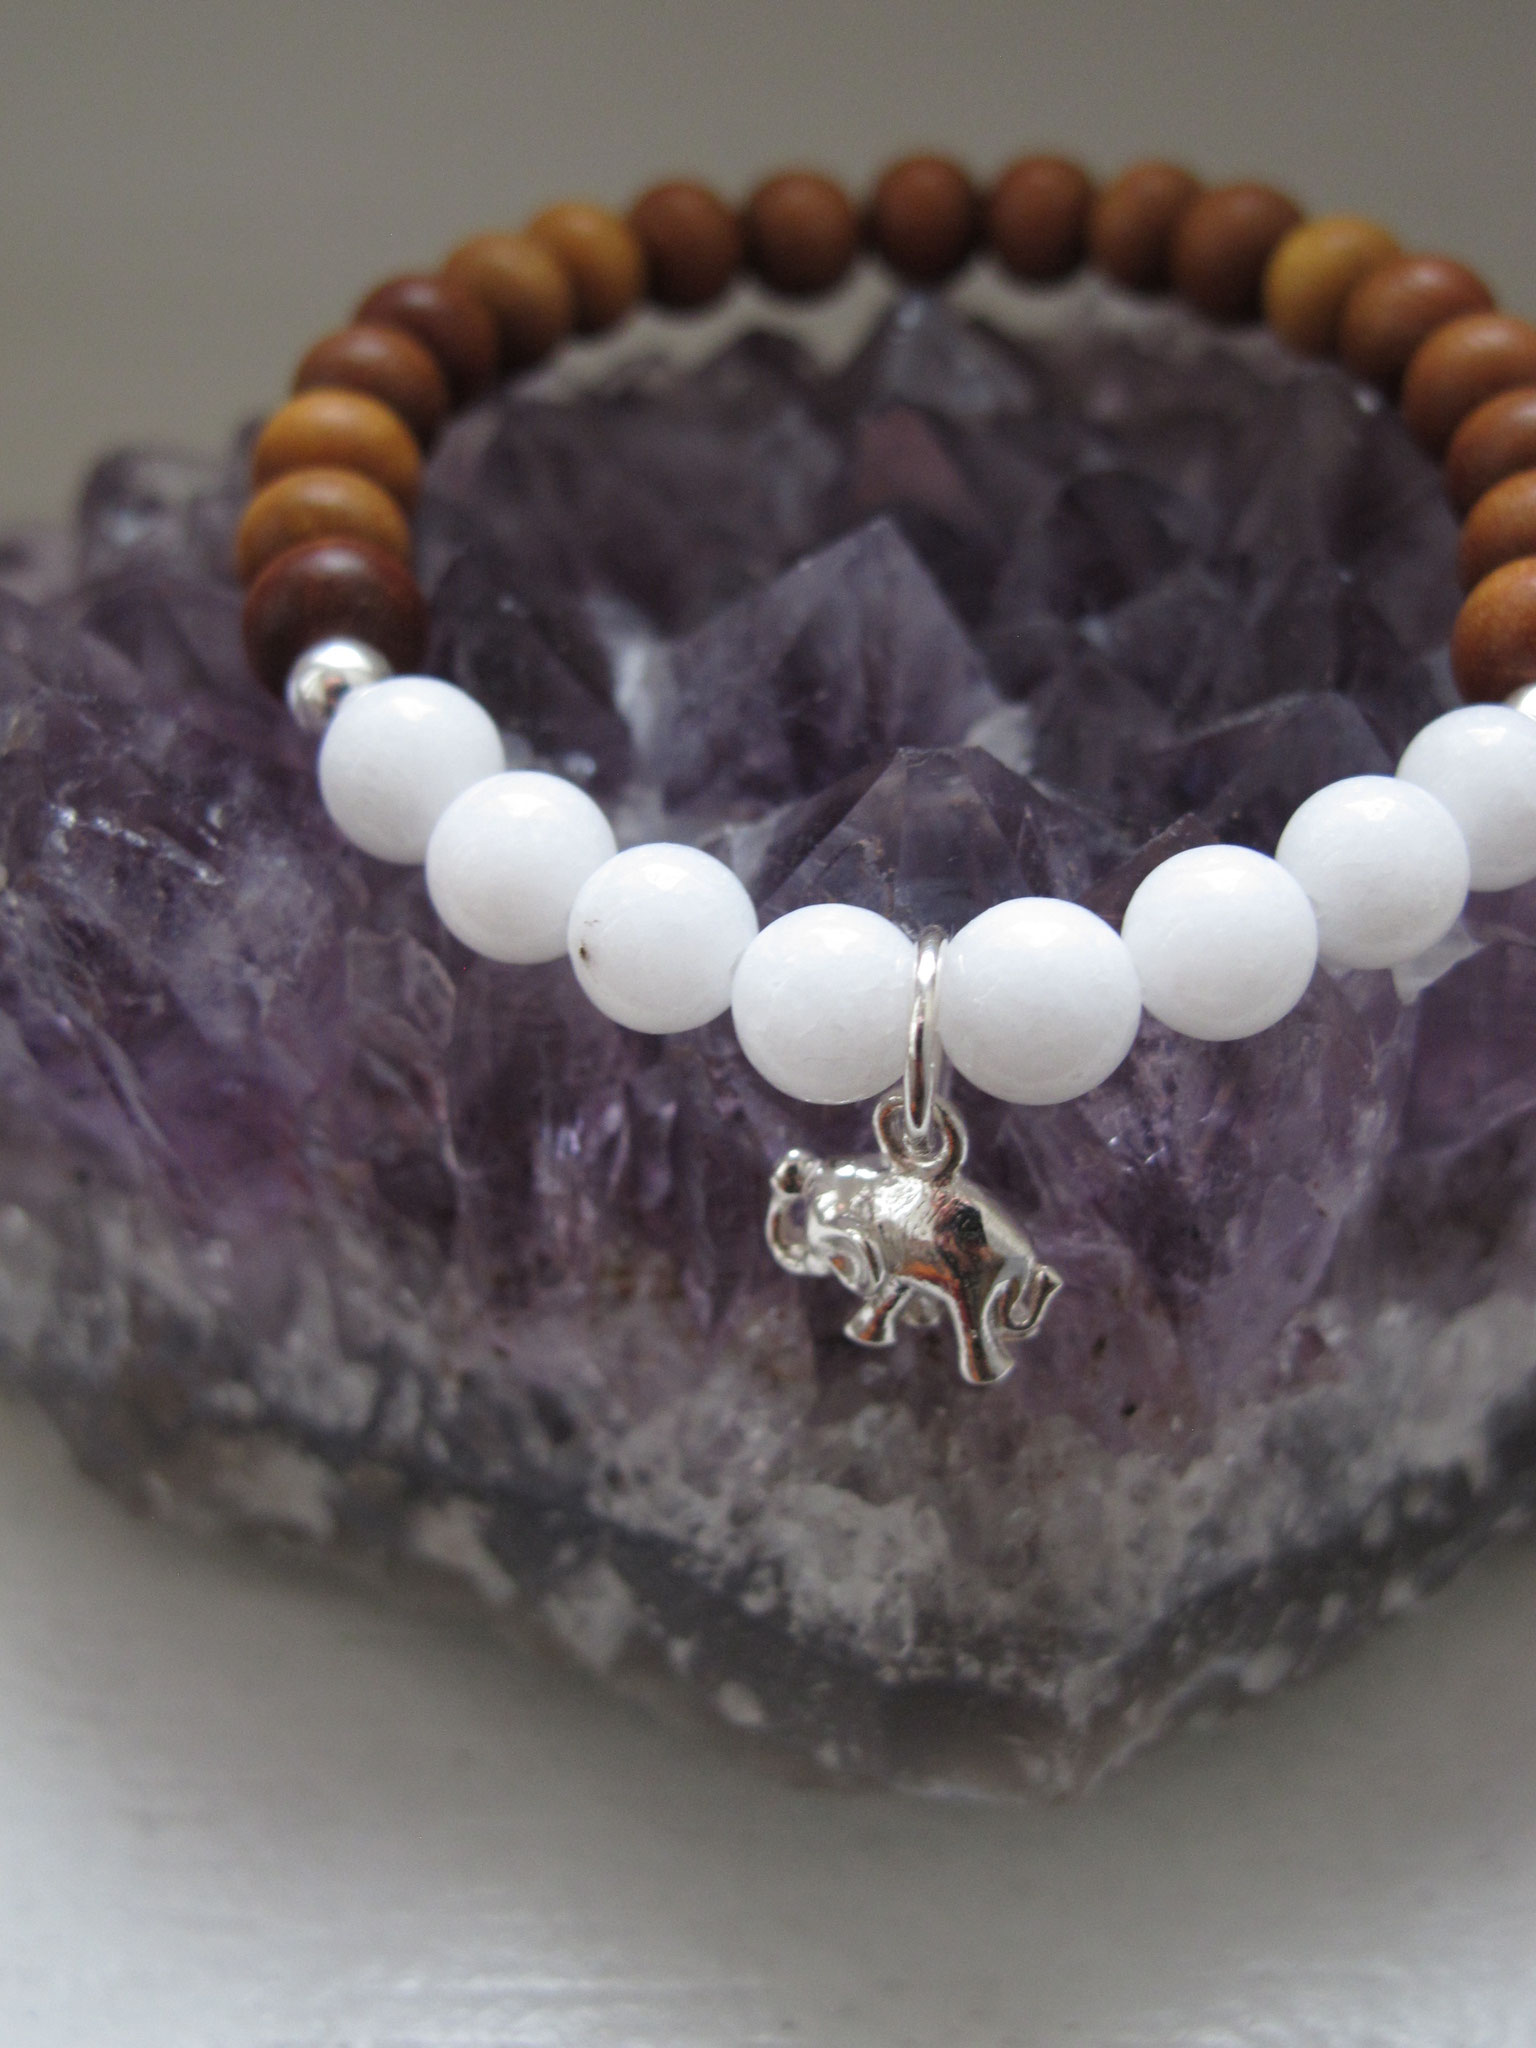 Lovely union between white jade and sandalwood - 925 Sterling silver elephant charm